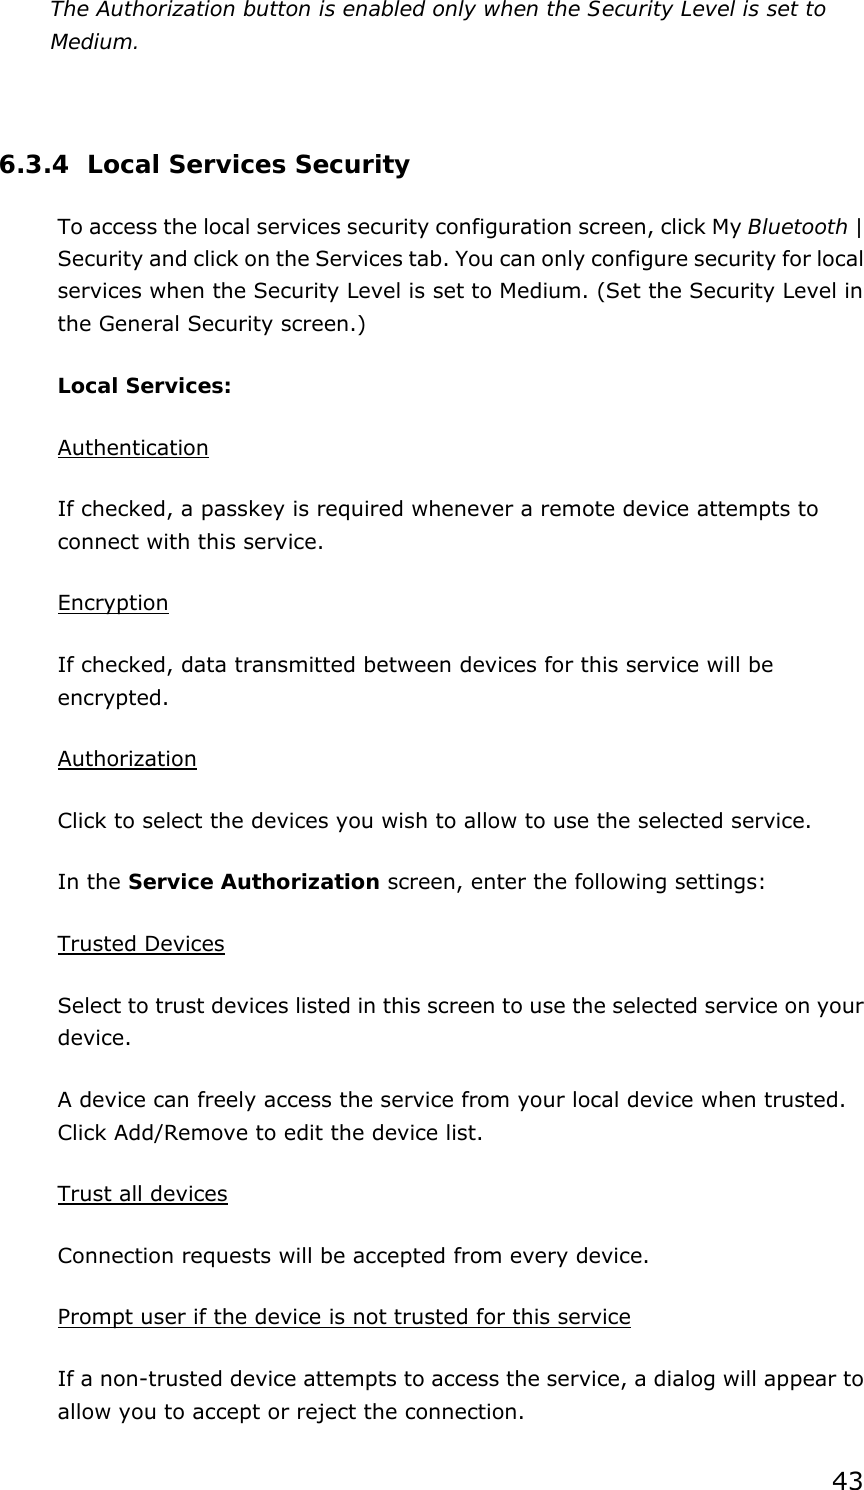 43 The Authorization button is enabled only when the Security Level is set to Medium.    6.3.4 Local Services Security To access the local services security configuration screen, click My Bluetooth | Security and click on the Services tab. You can only configure security for local services when the Security Level is set to Medium. (Set the Security Level in the General Security screen.) Local Services: Authentication If checked, a passkey is required whenever a remote device attempts to connect with this service. Encryption If checked, data transmitted between devices for this service will be encrypted. Authorization Click to select the devices you wish to allow to use the selected service. In the Service Authorization screen, enter the following settings: Trusted Devices Select to trust devices listed in this screen to use the selected service on your device. A device can freely access the service from your local device when trusted. Click Add/Remove to edit the device list. Trust all devices Connection requests will be accepted from every device.   Prompt user if the device is not trusted for this service If a non-trusted device attempts to access the service, a dialog will appear to allow you to accept or reject the connection.   